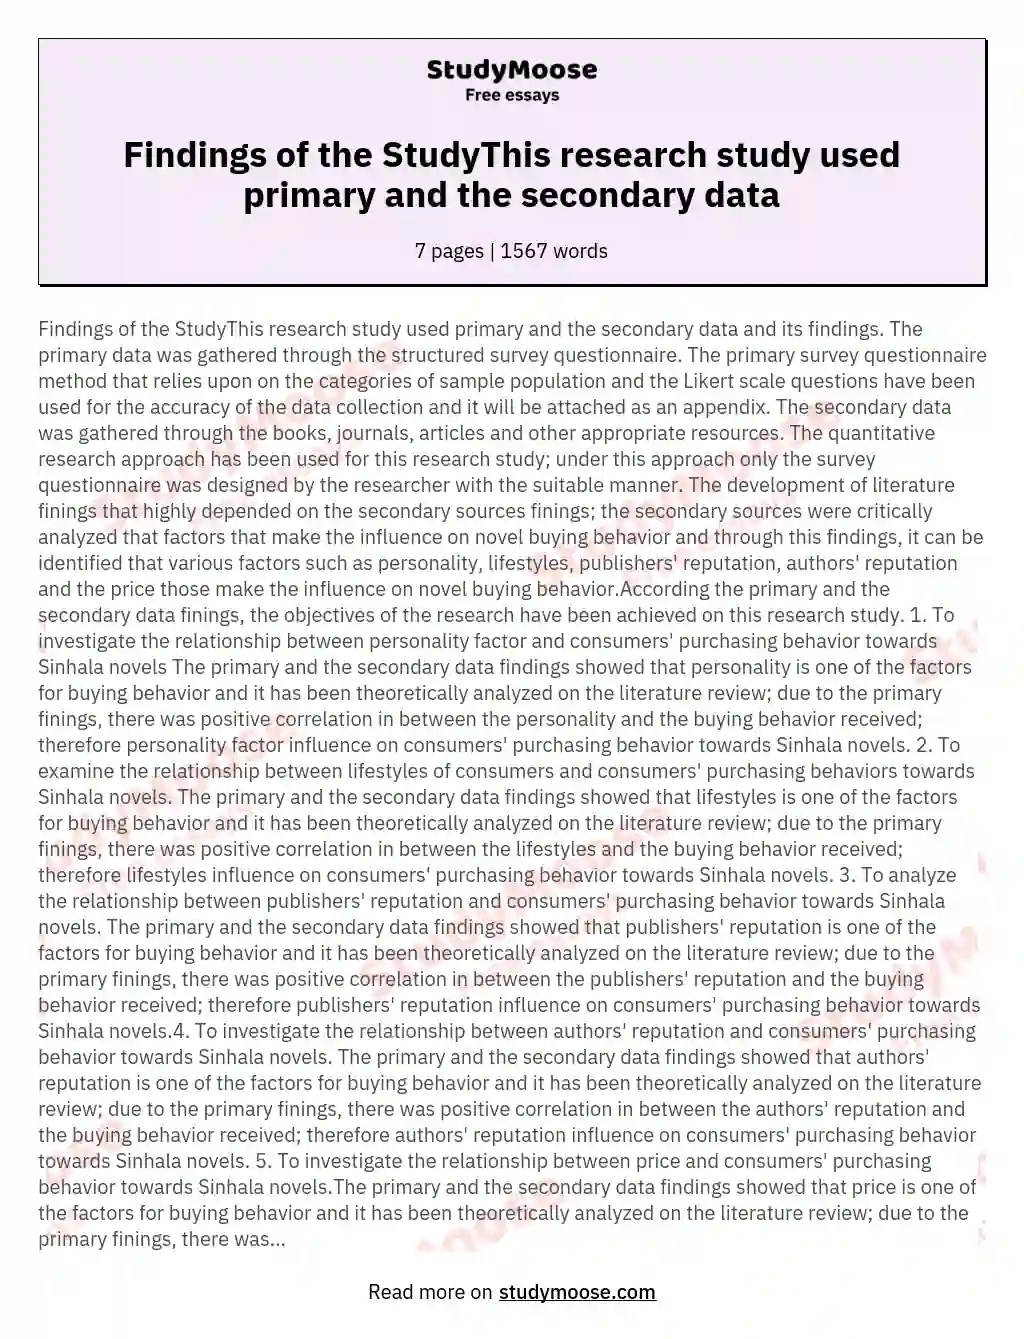 Findings of the StudyThis research study used primary and the secondary data